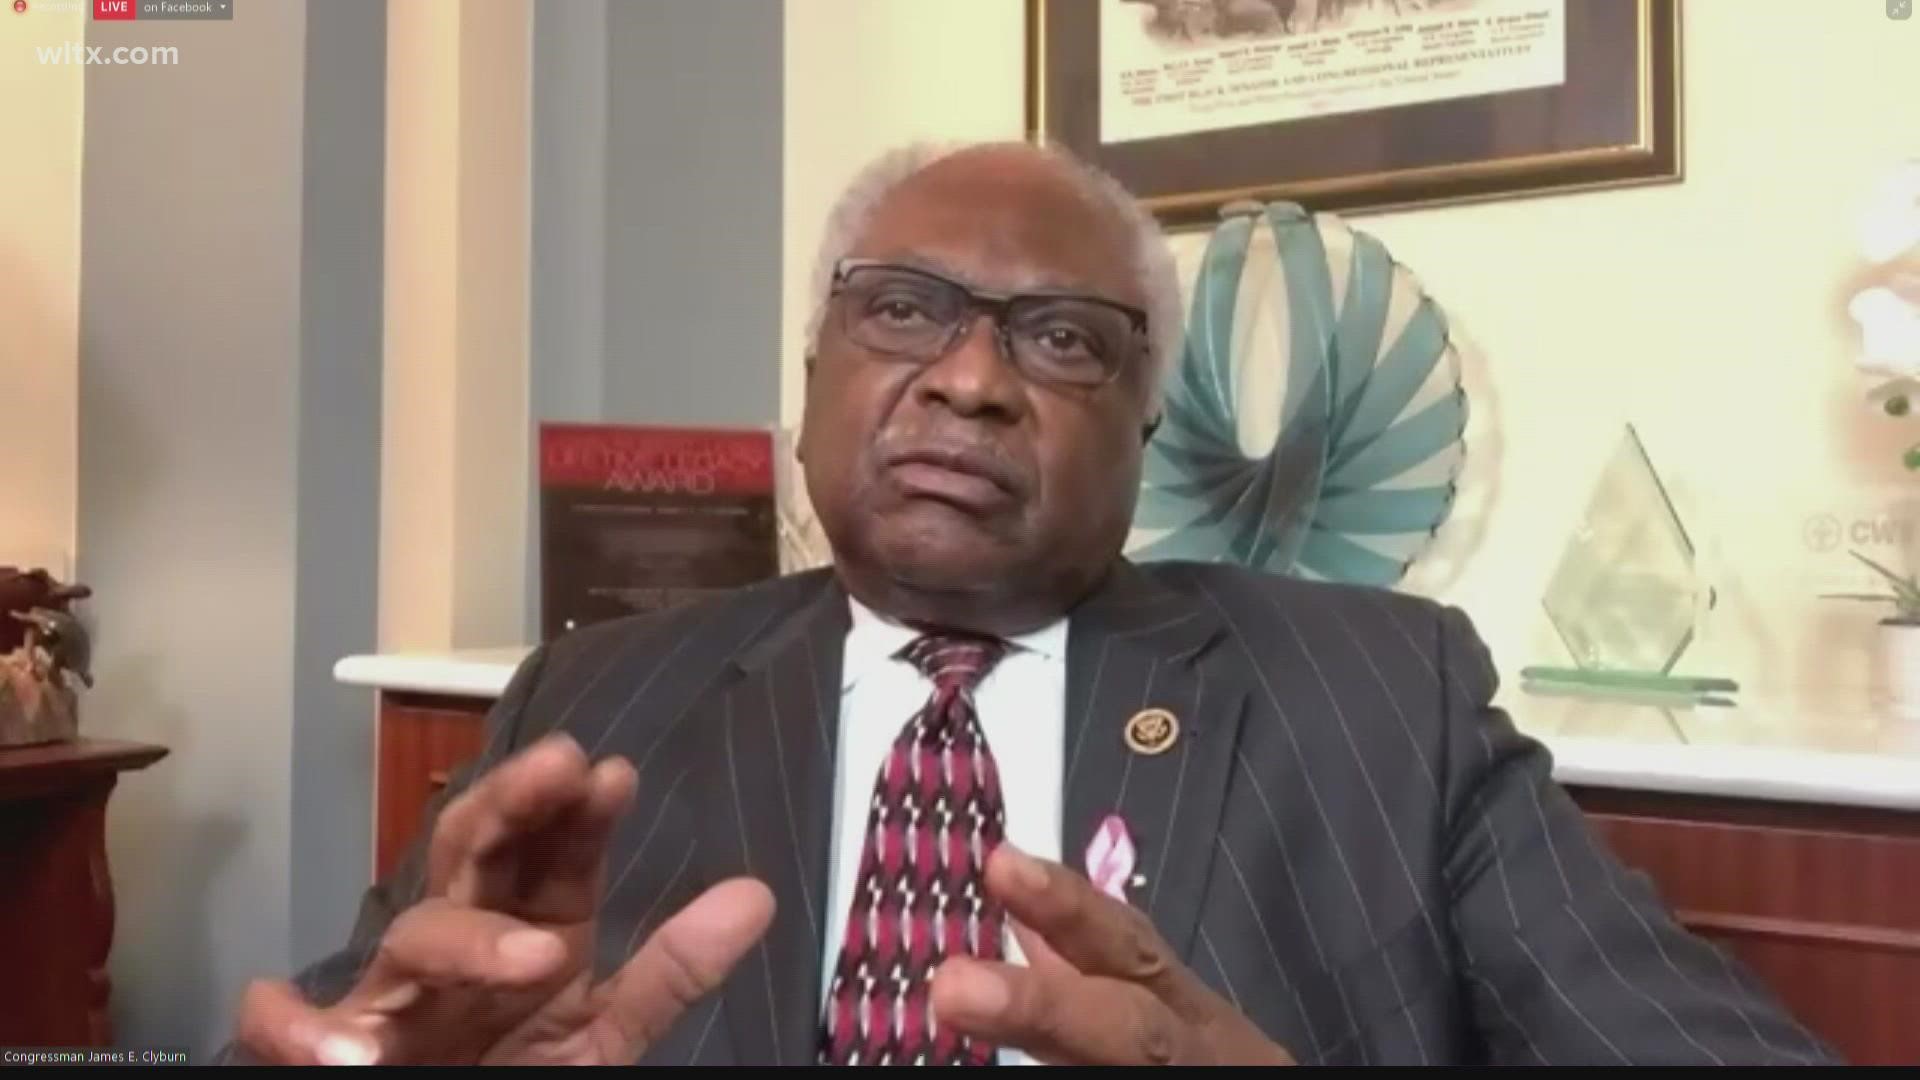 Wednesday night, members of the South Carolina Jewish Community talked with 6th District Congressman Jim Clyburn about hate crimes and racism across the country.